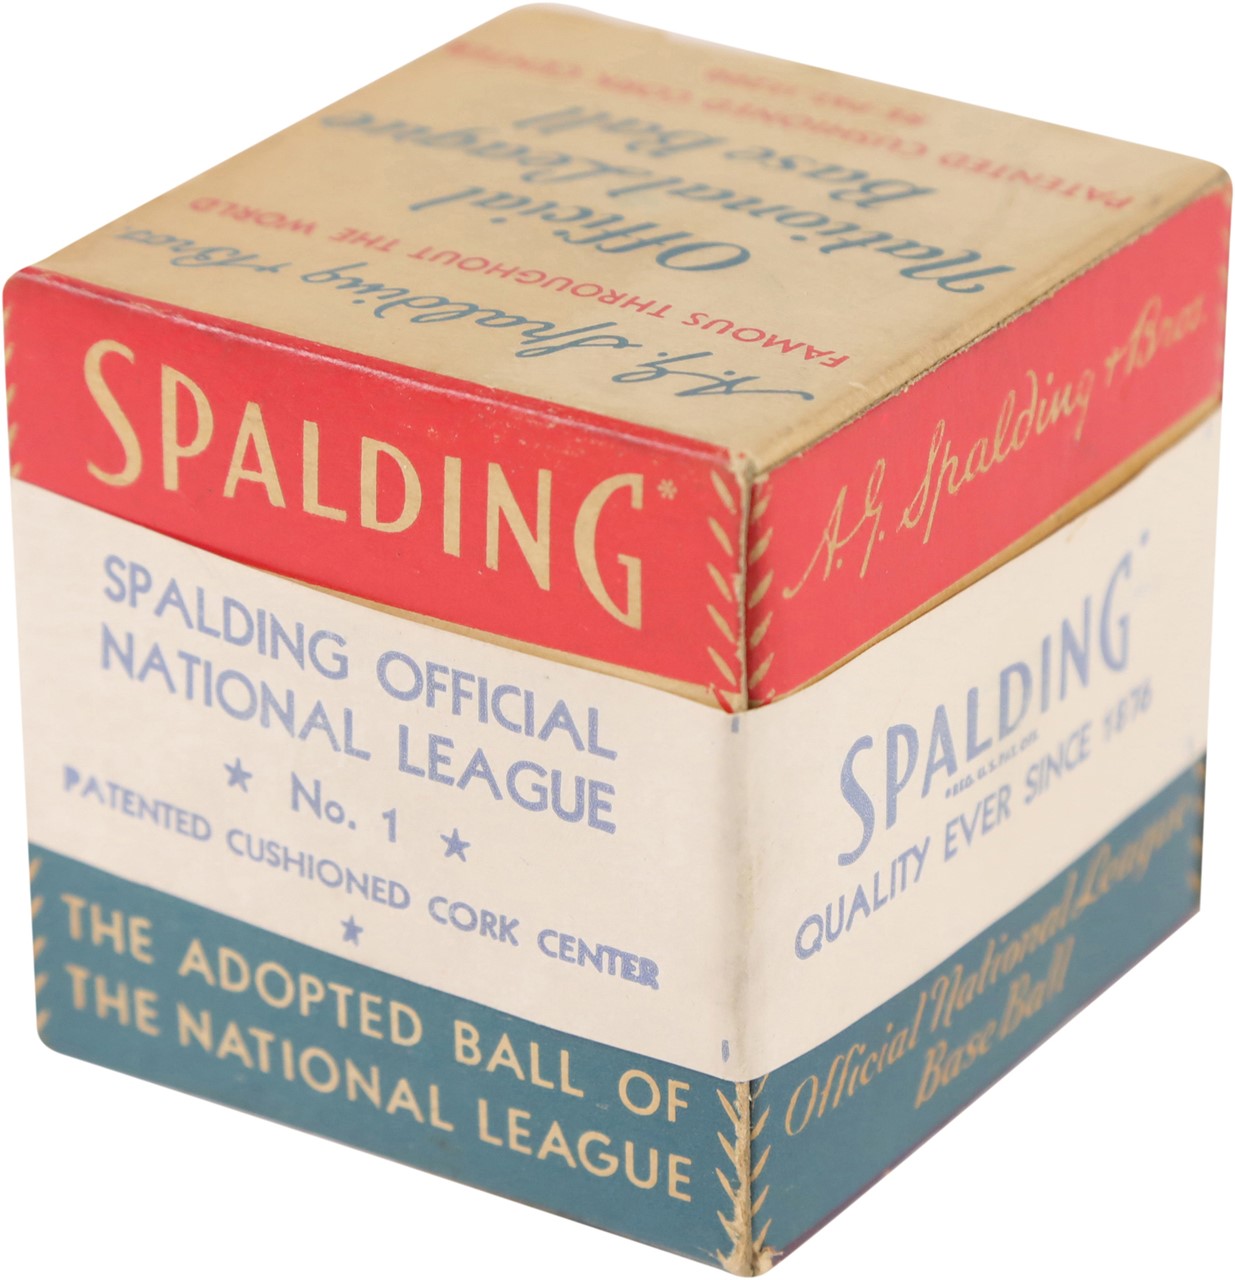 - Ford Frick Sealed Official National League Baseball in Box